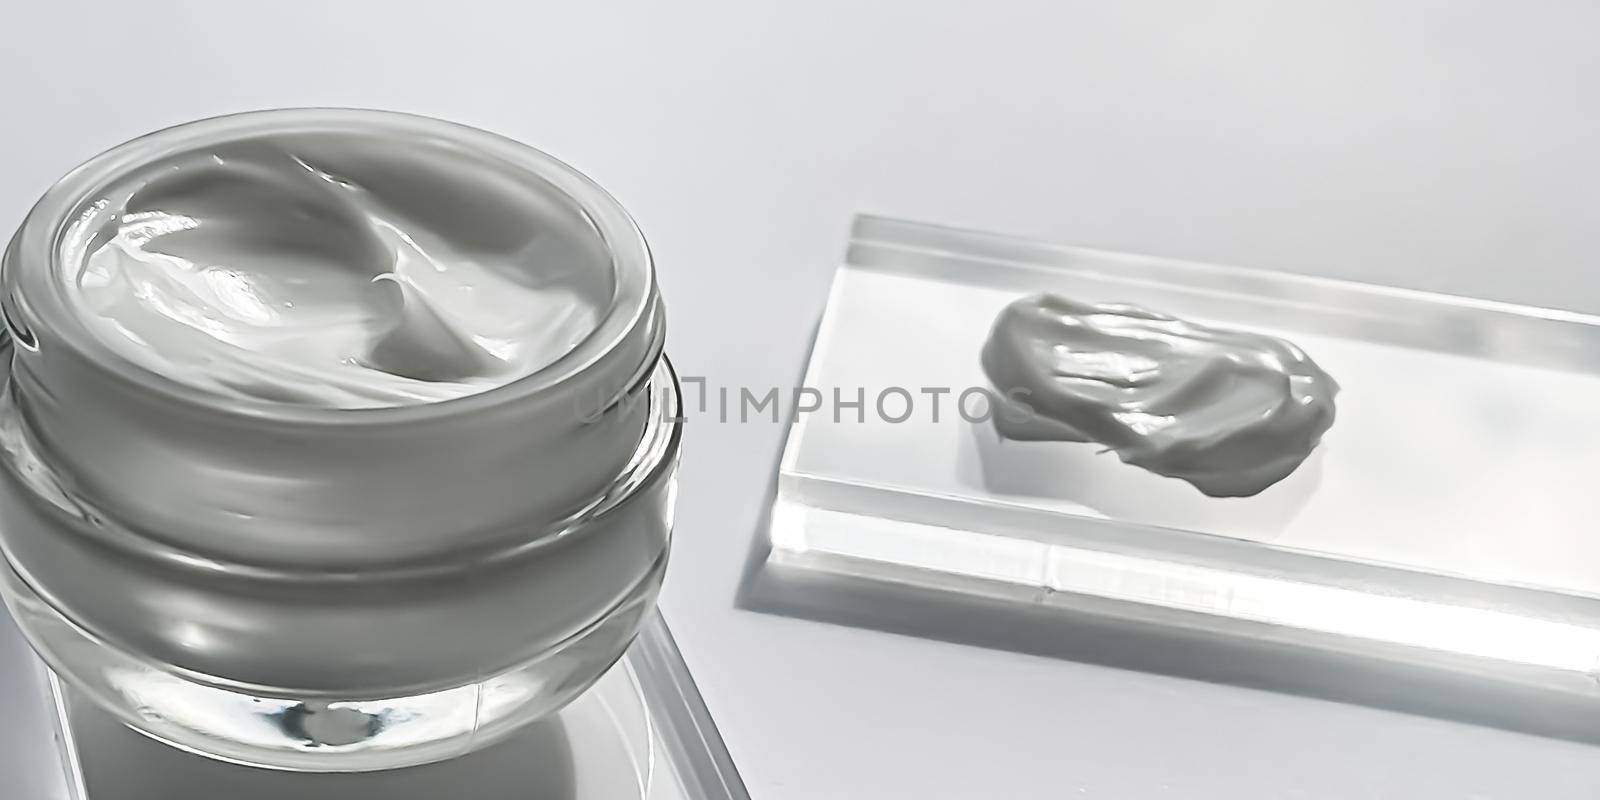 Face cream moisturiser jar and product sample on glass, beauty and skincare, cosmetic science by Anneleven